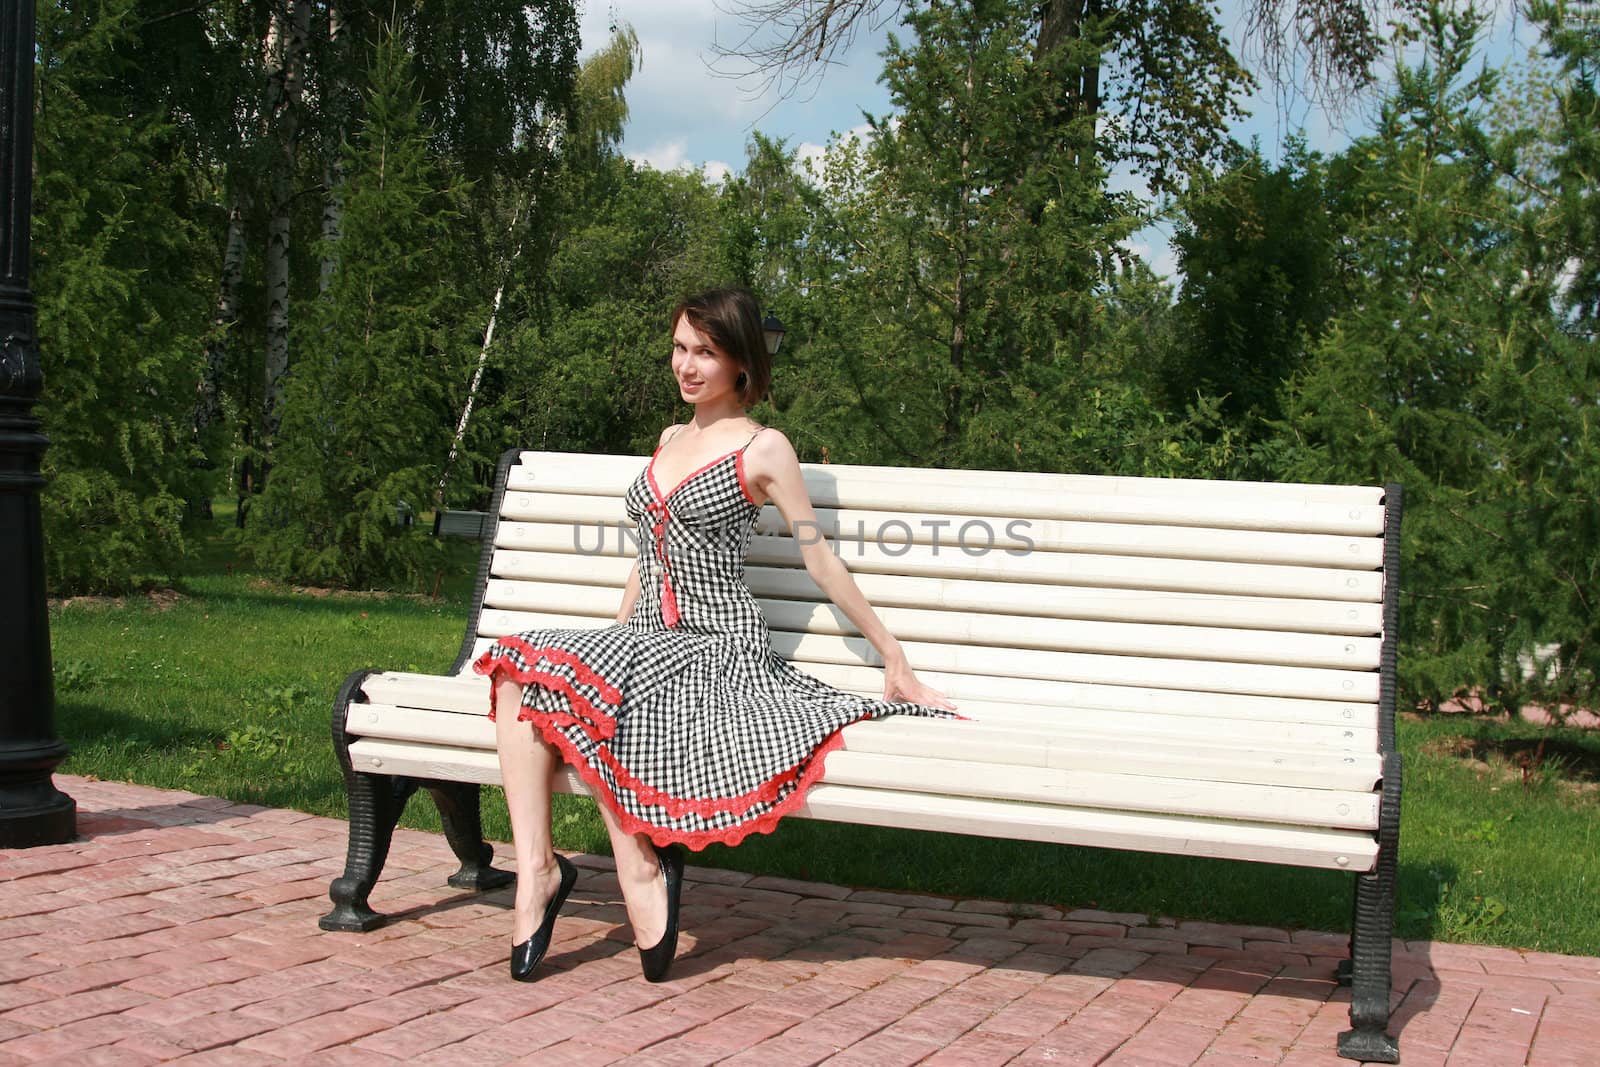 The girl sits on a bench and coquettishly poses